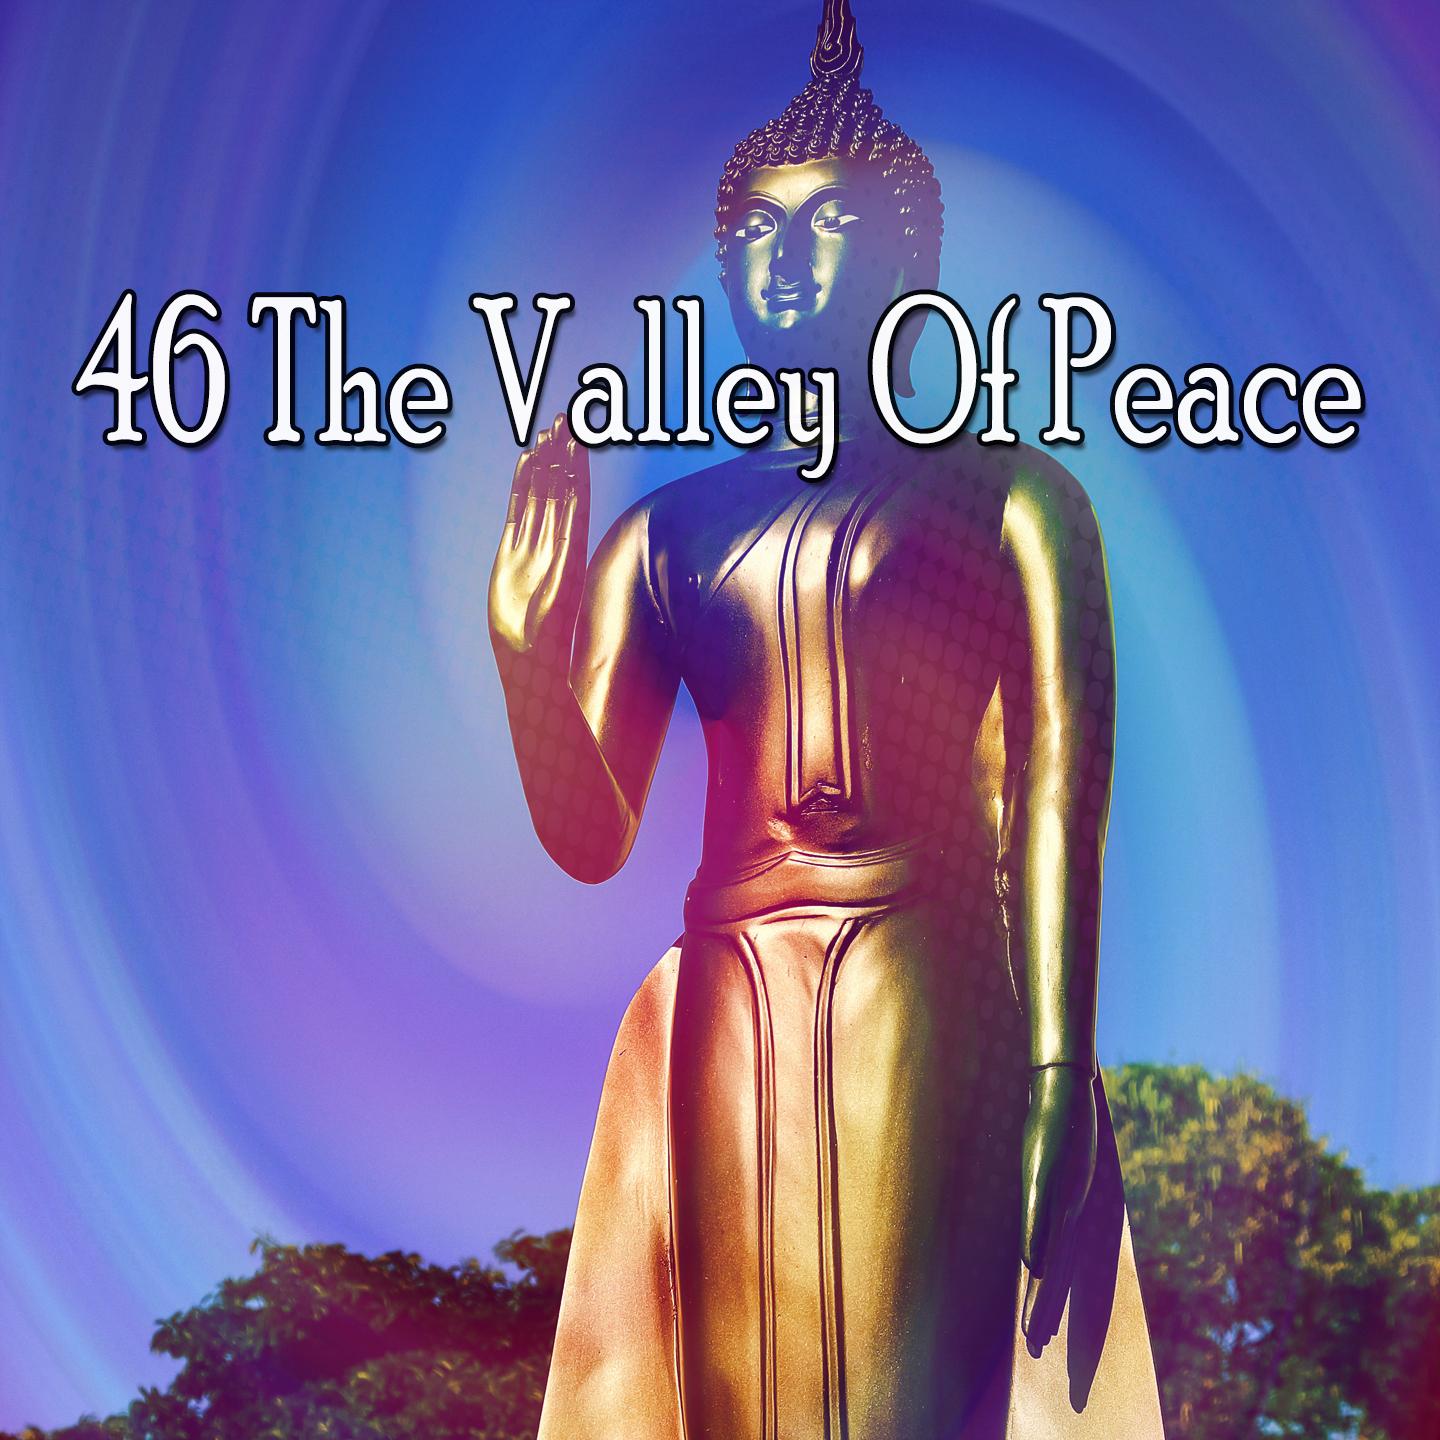 46 The Valley of Peace